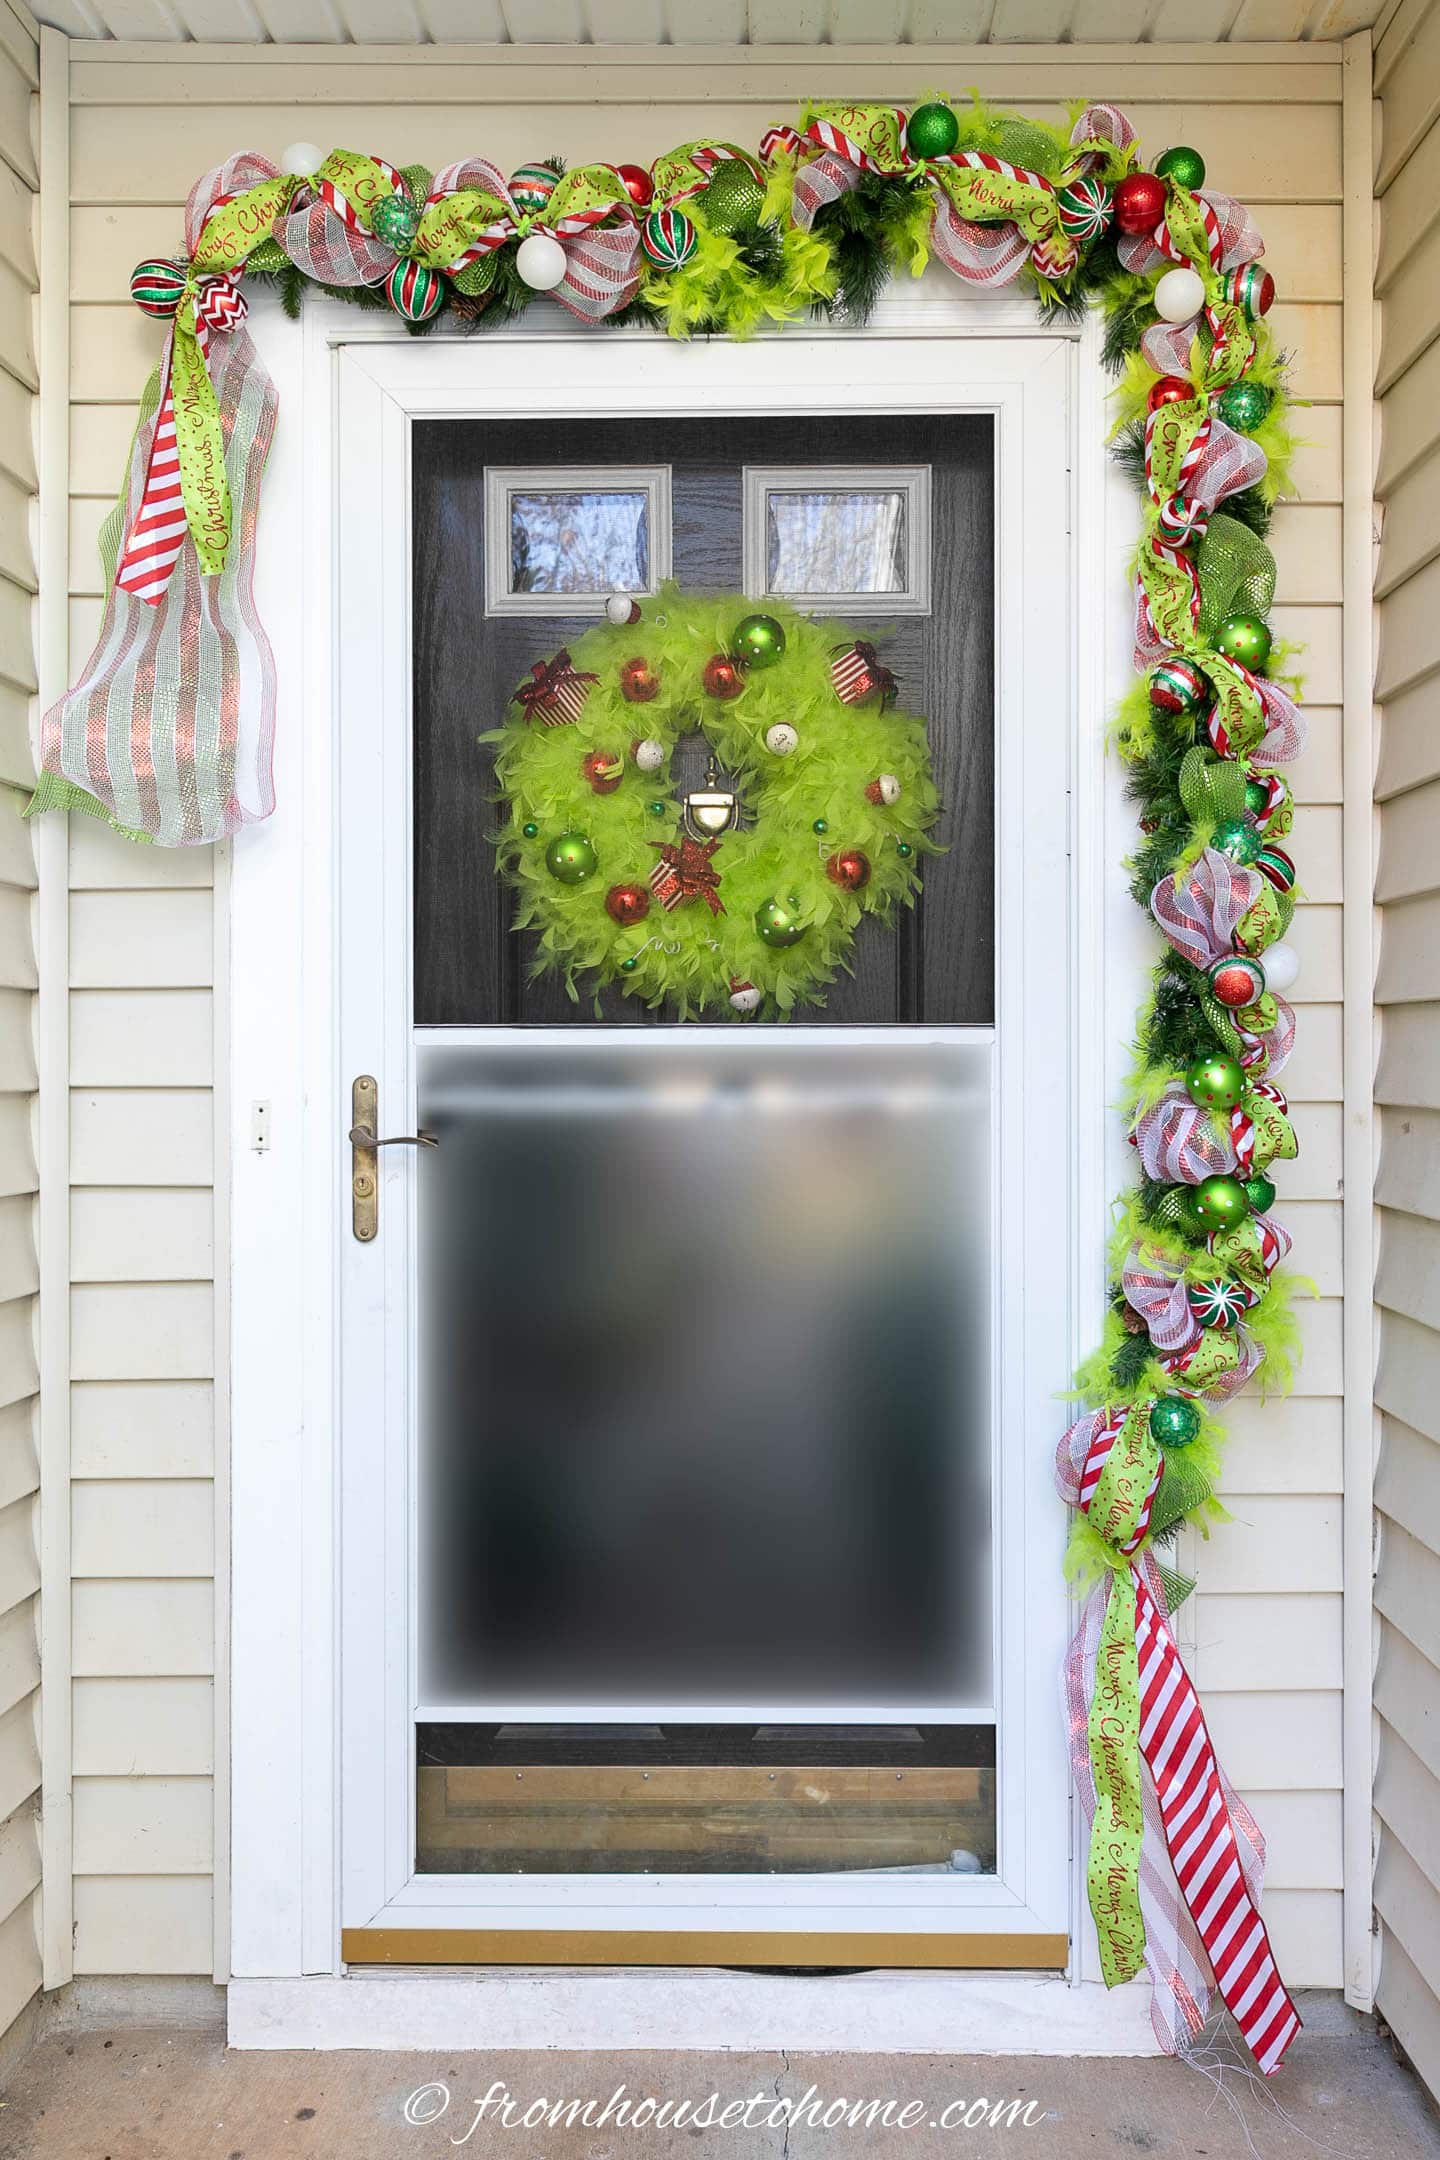 DIY Grinch garland over a front door with a Grinch wreath on it